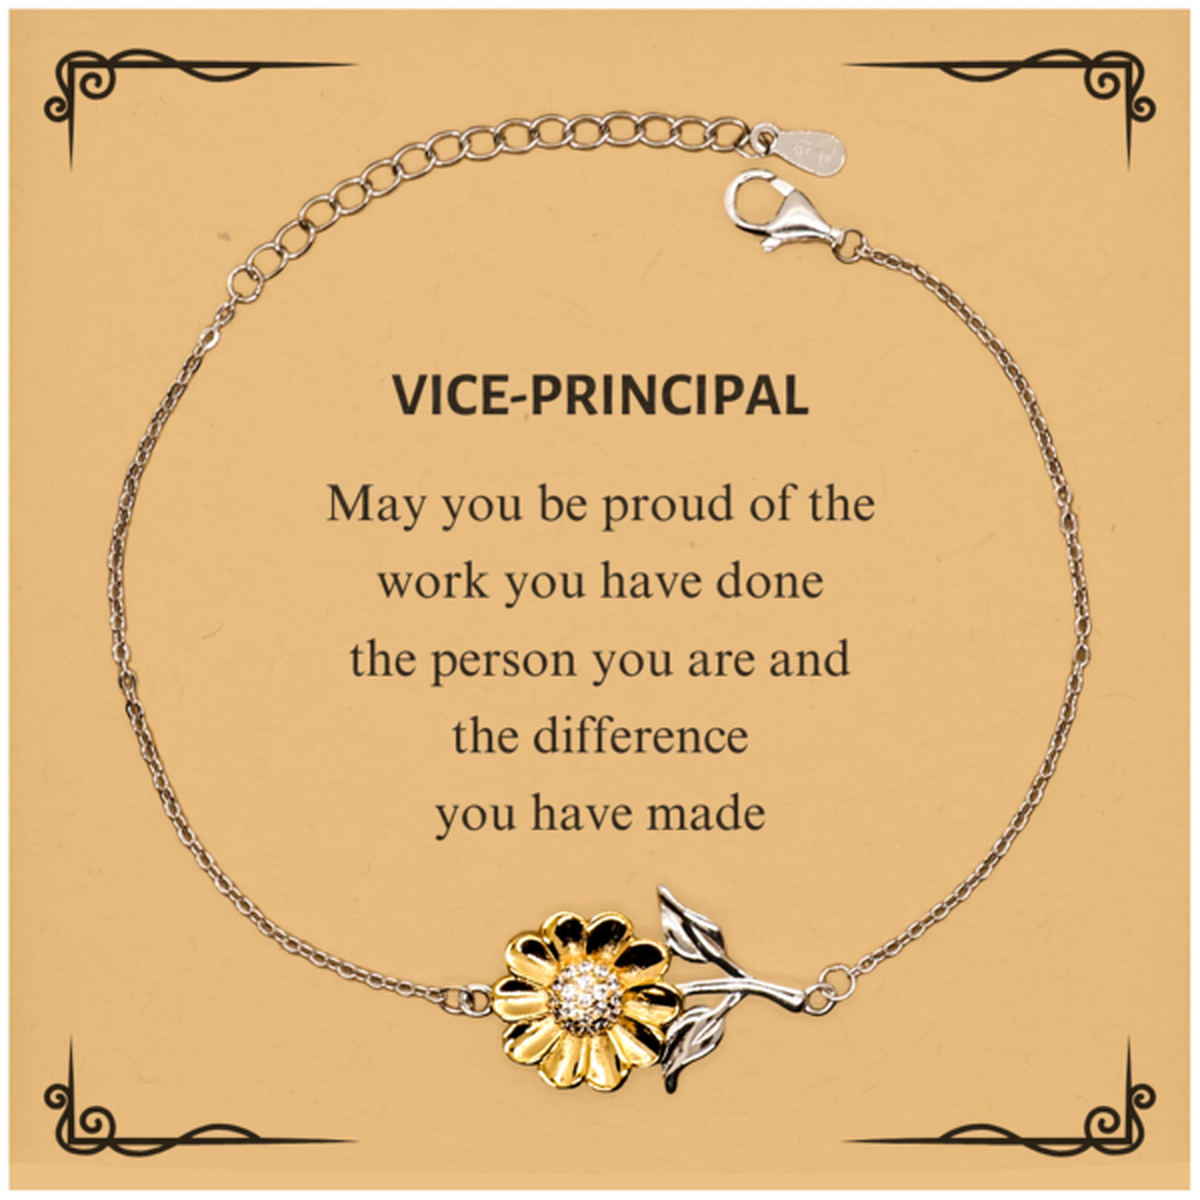 Vice-principal May you be proud of the work you have done, Retirement Vice-principal Sunflower Bracelet for Colleague Appreciation Gifts Amazing for Vice-principal